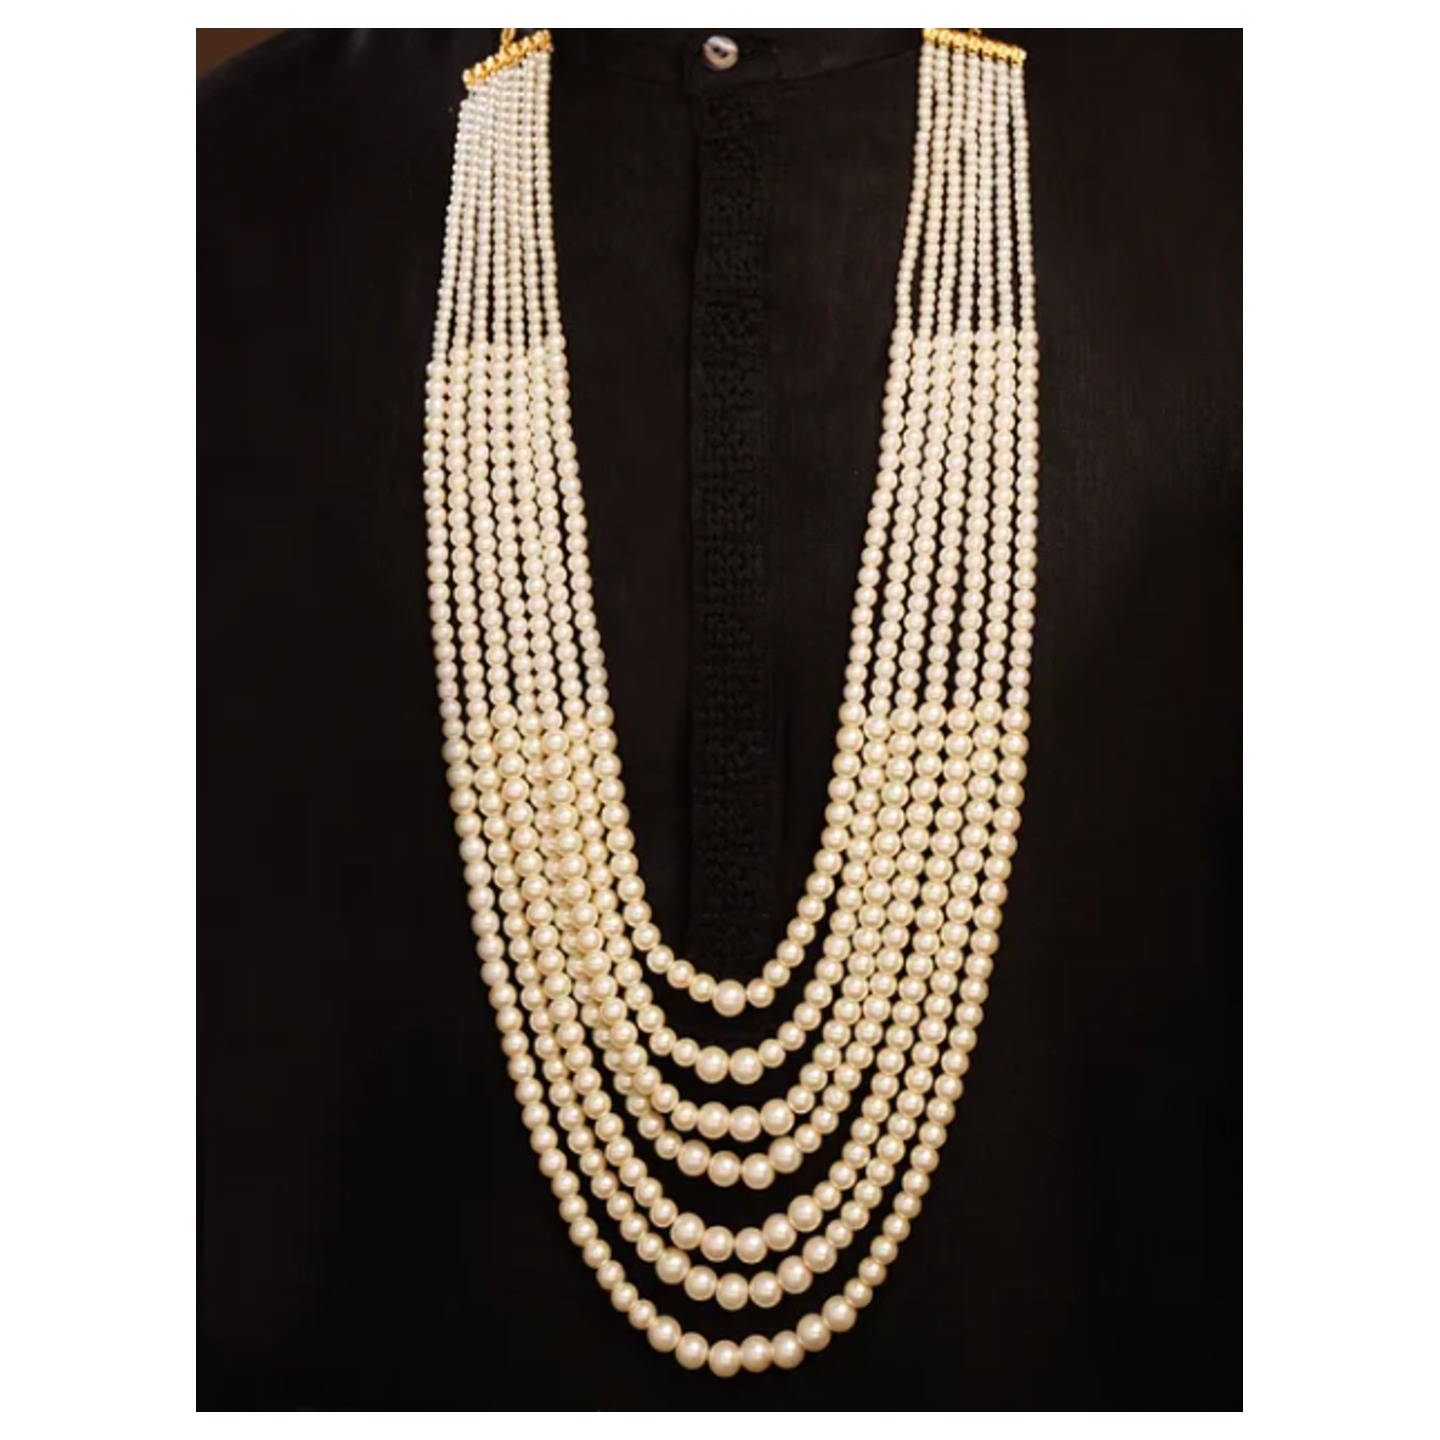 White Beaded Layered Necklace With Pearls For Men 